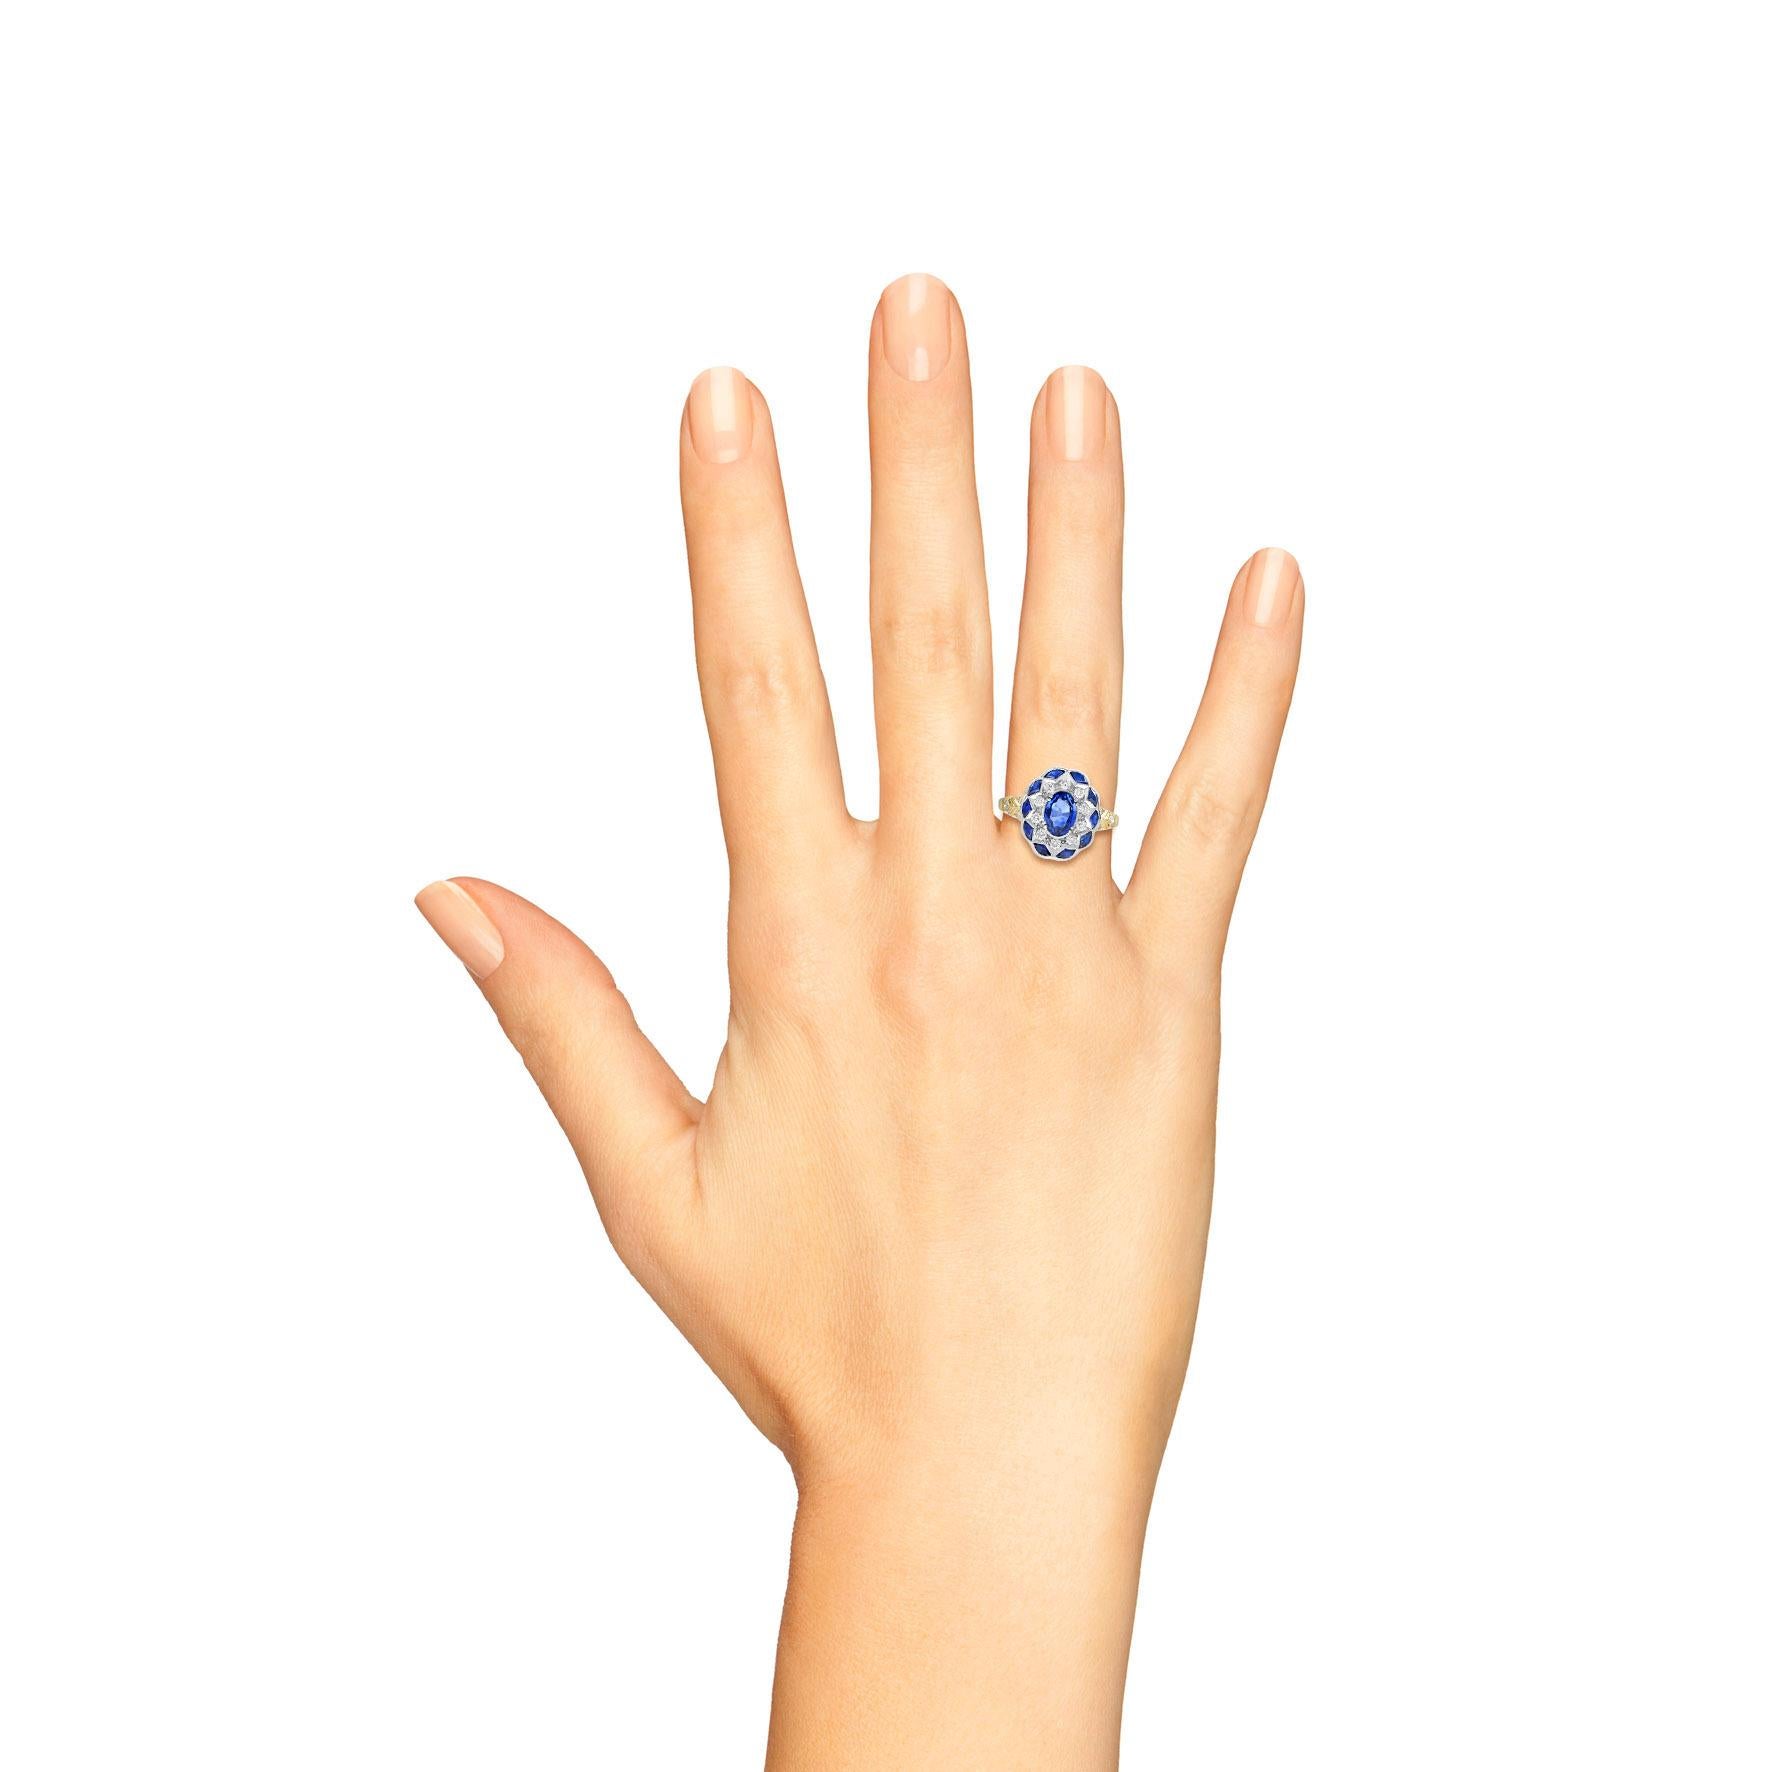 A gorgeous ring with Ceylon sapphire and diamond flower motif. The center bezel set with a vivid blue oval cut sapphire within a halo surround of 12 round diamonds and 10 marquise sapphires. Each shoulder is decorated by a glittering diamond. The